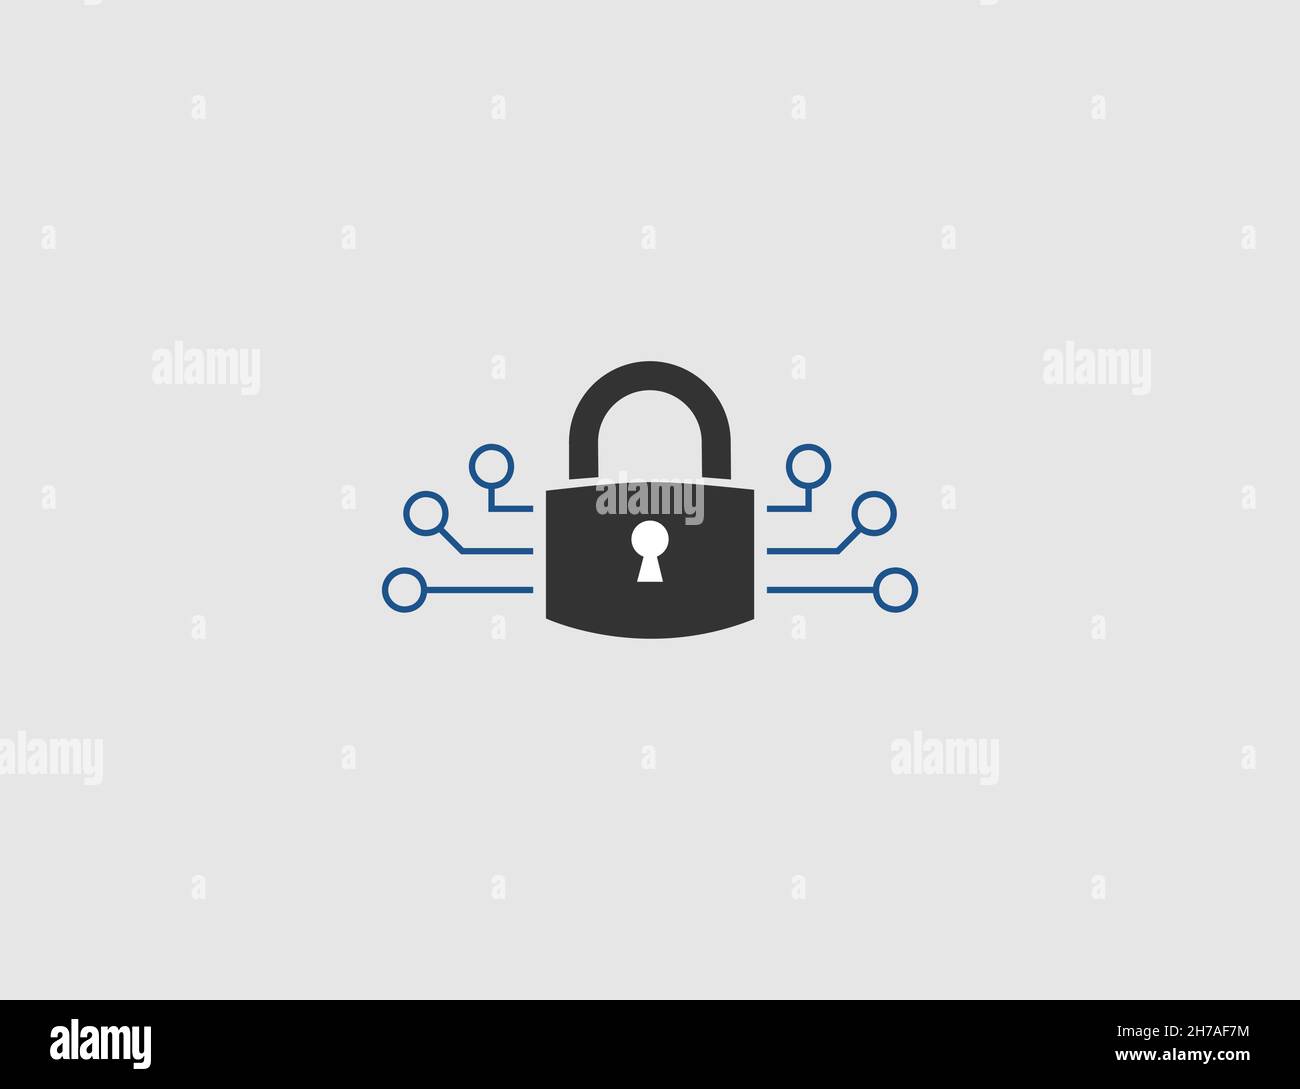 Vector illustration. Flat design. Cyber Security Icon Stock Vector